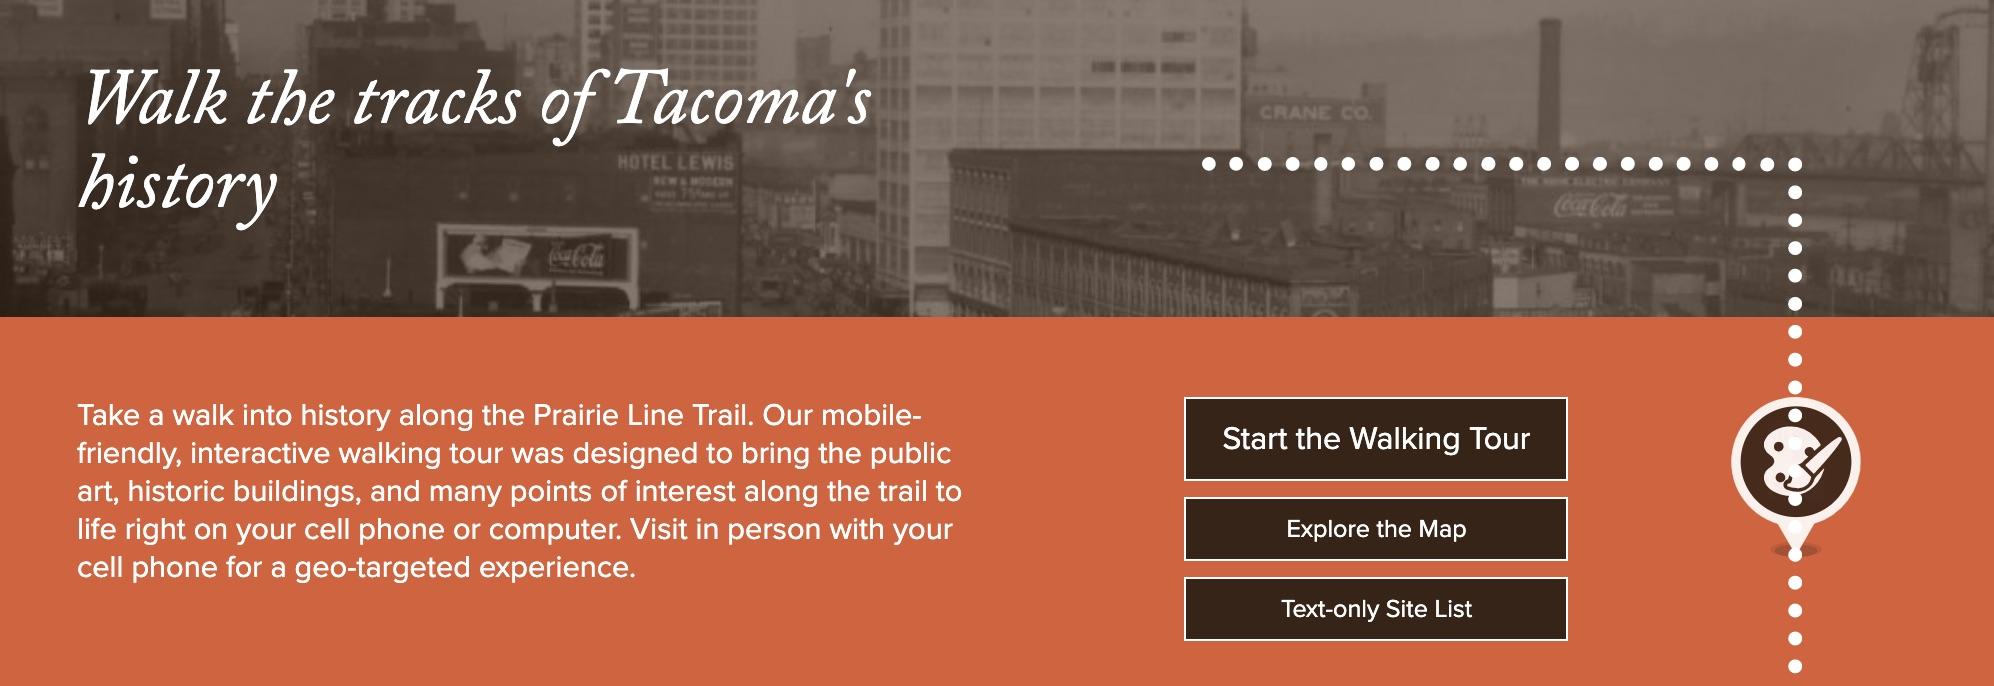 Screenshot image from PLT website featuring the words Walk the tracks of Tacoma